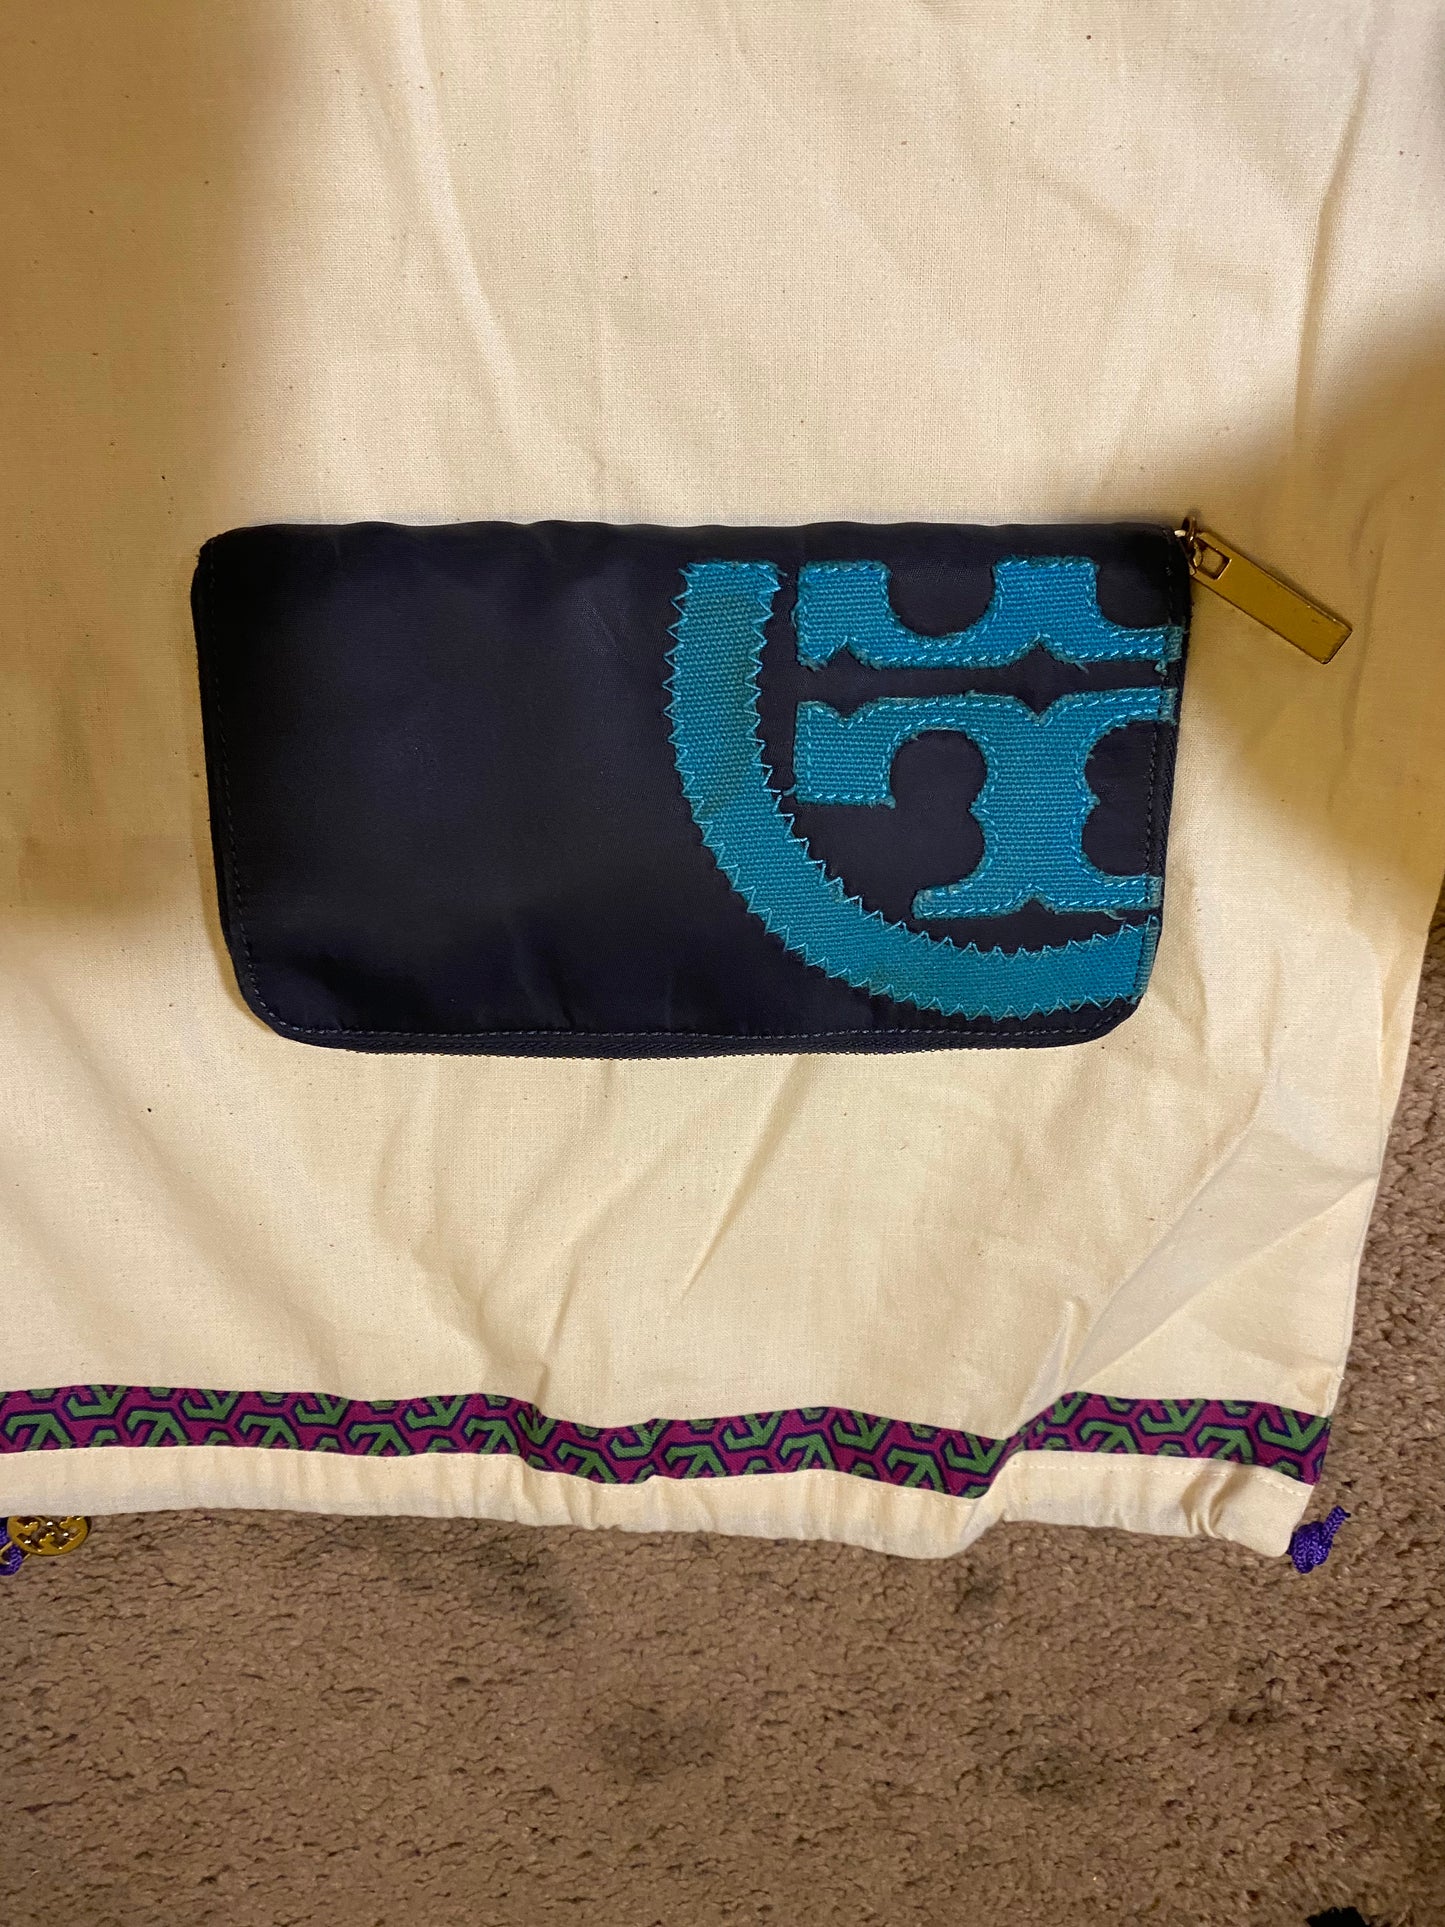 Used Accessories: Tory Burch Wallet